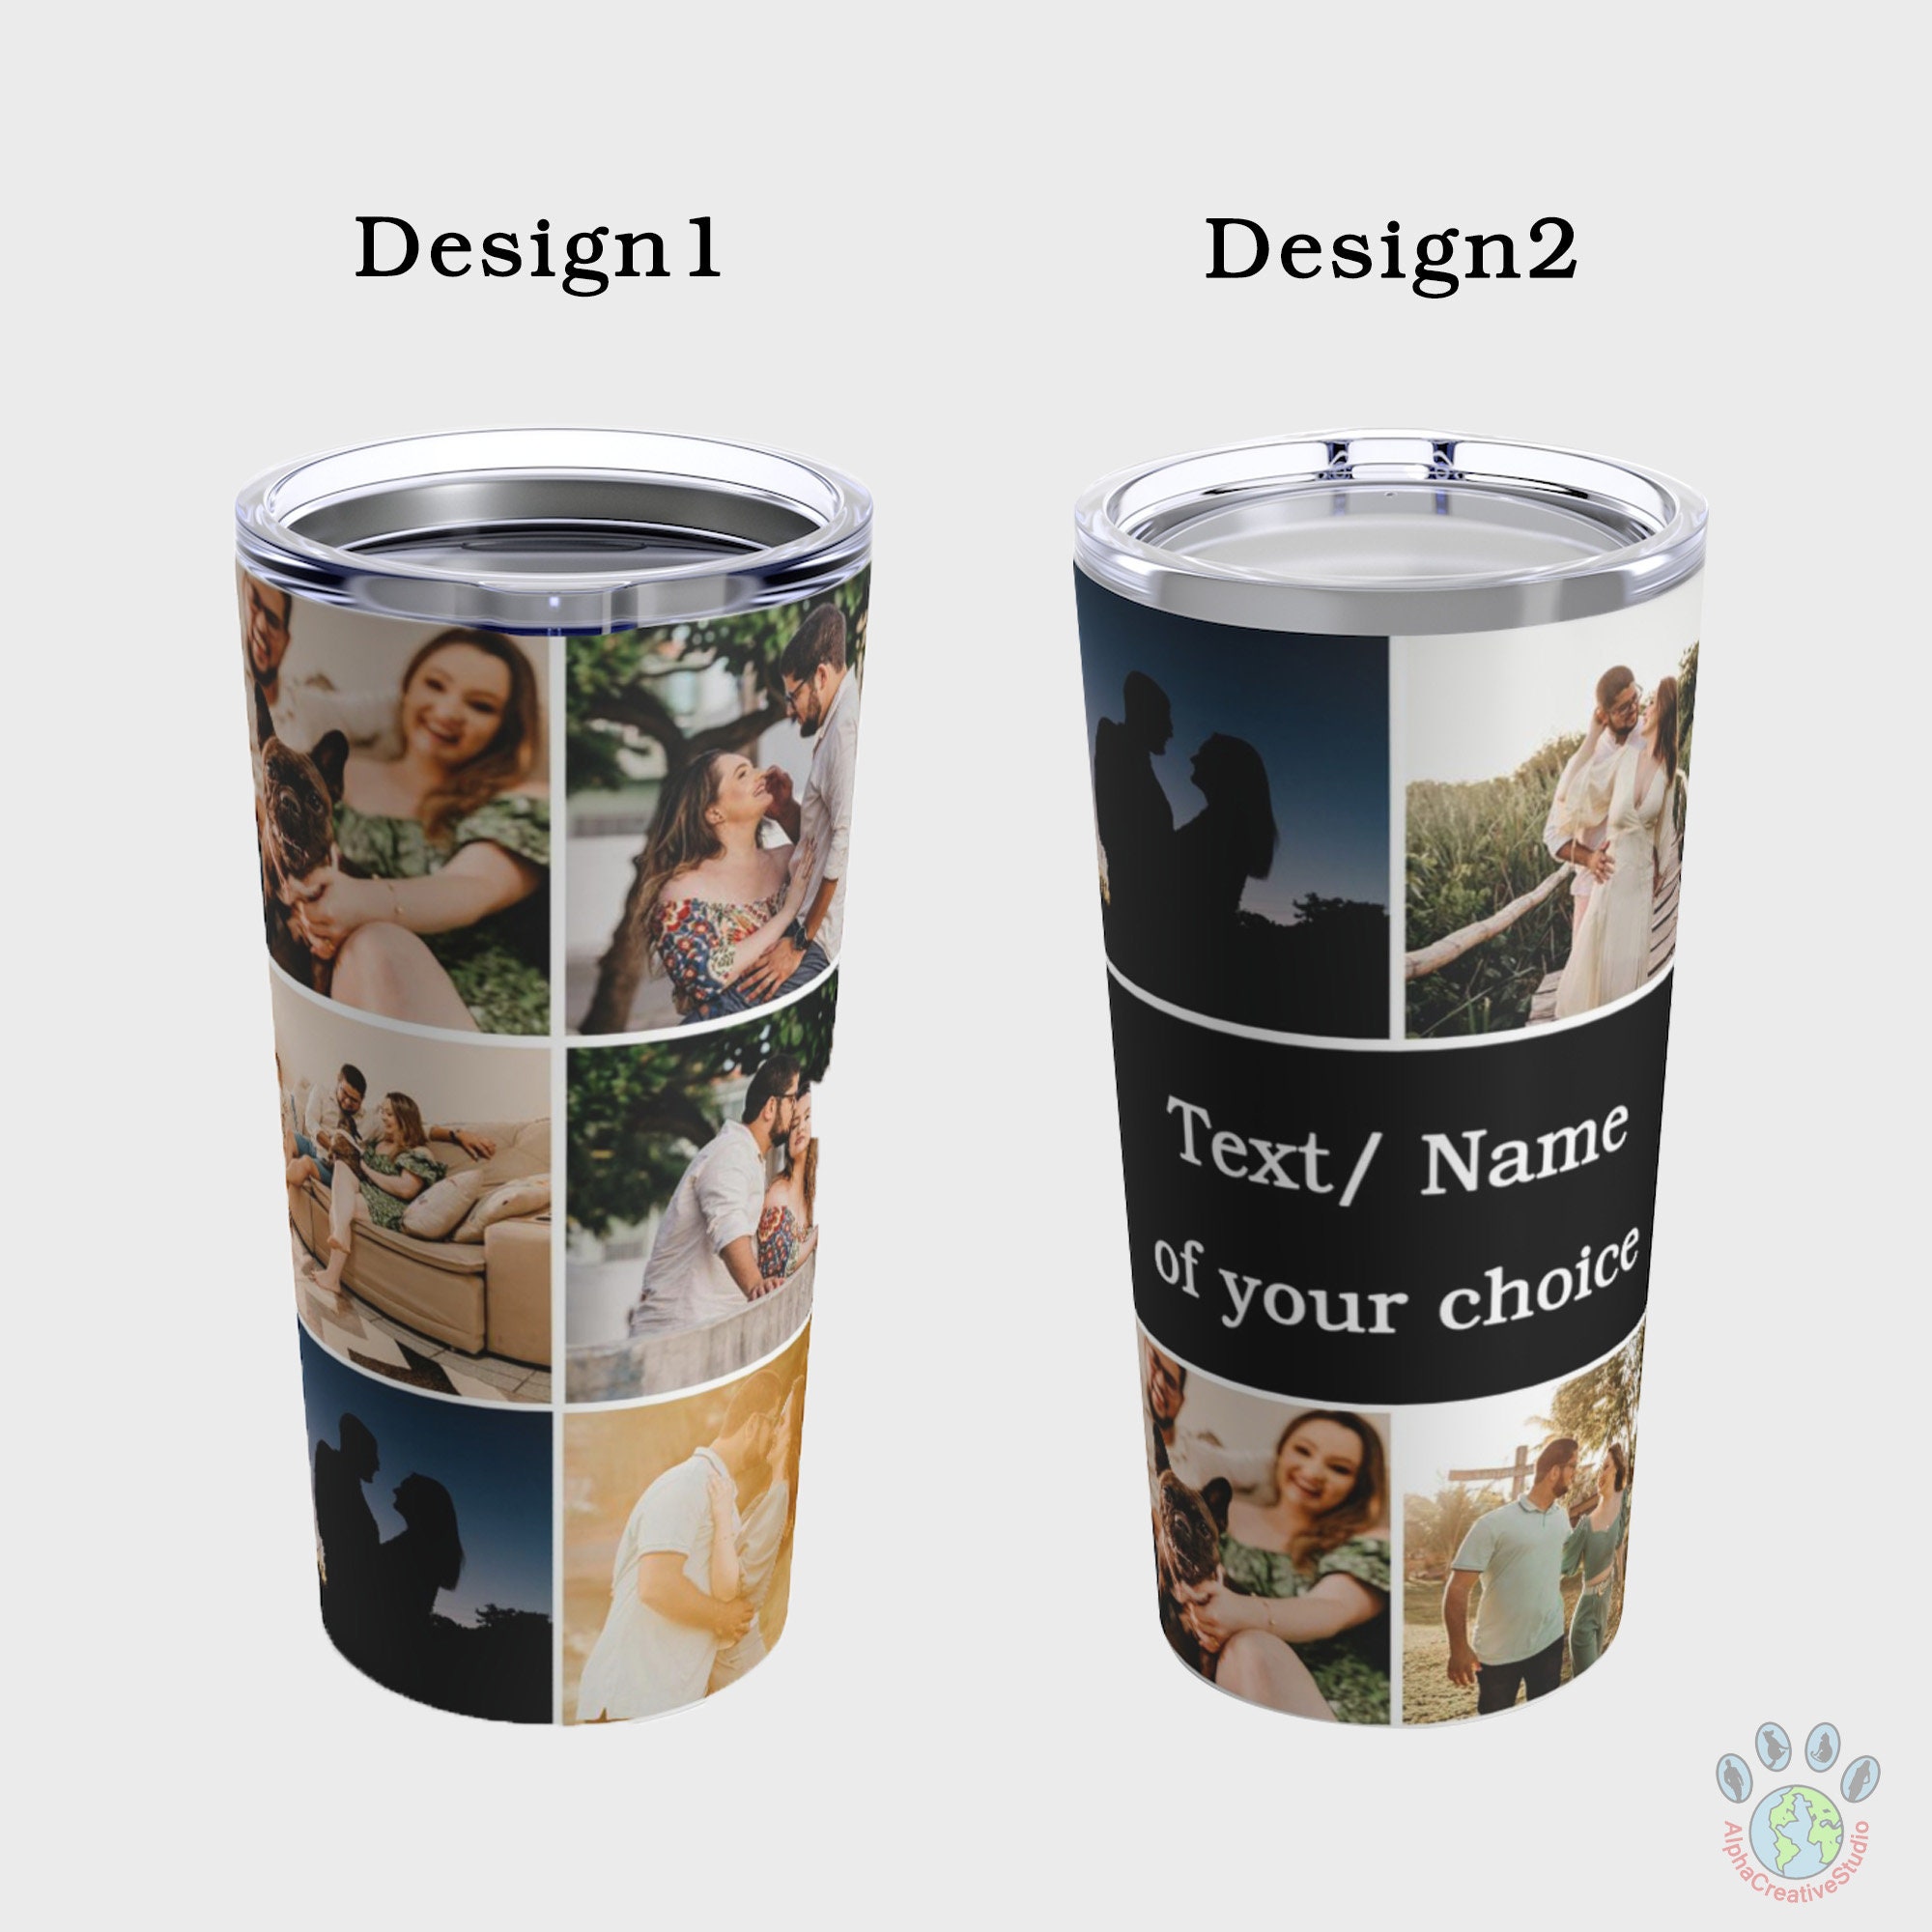 Tervis Lets Get Lost 24 oz. Clear Plastic Travel Mugs Double